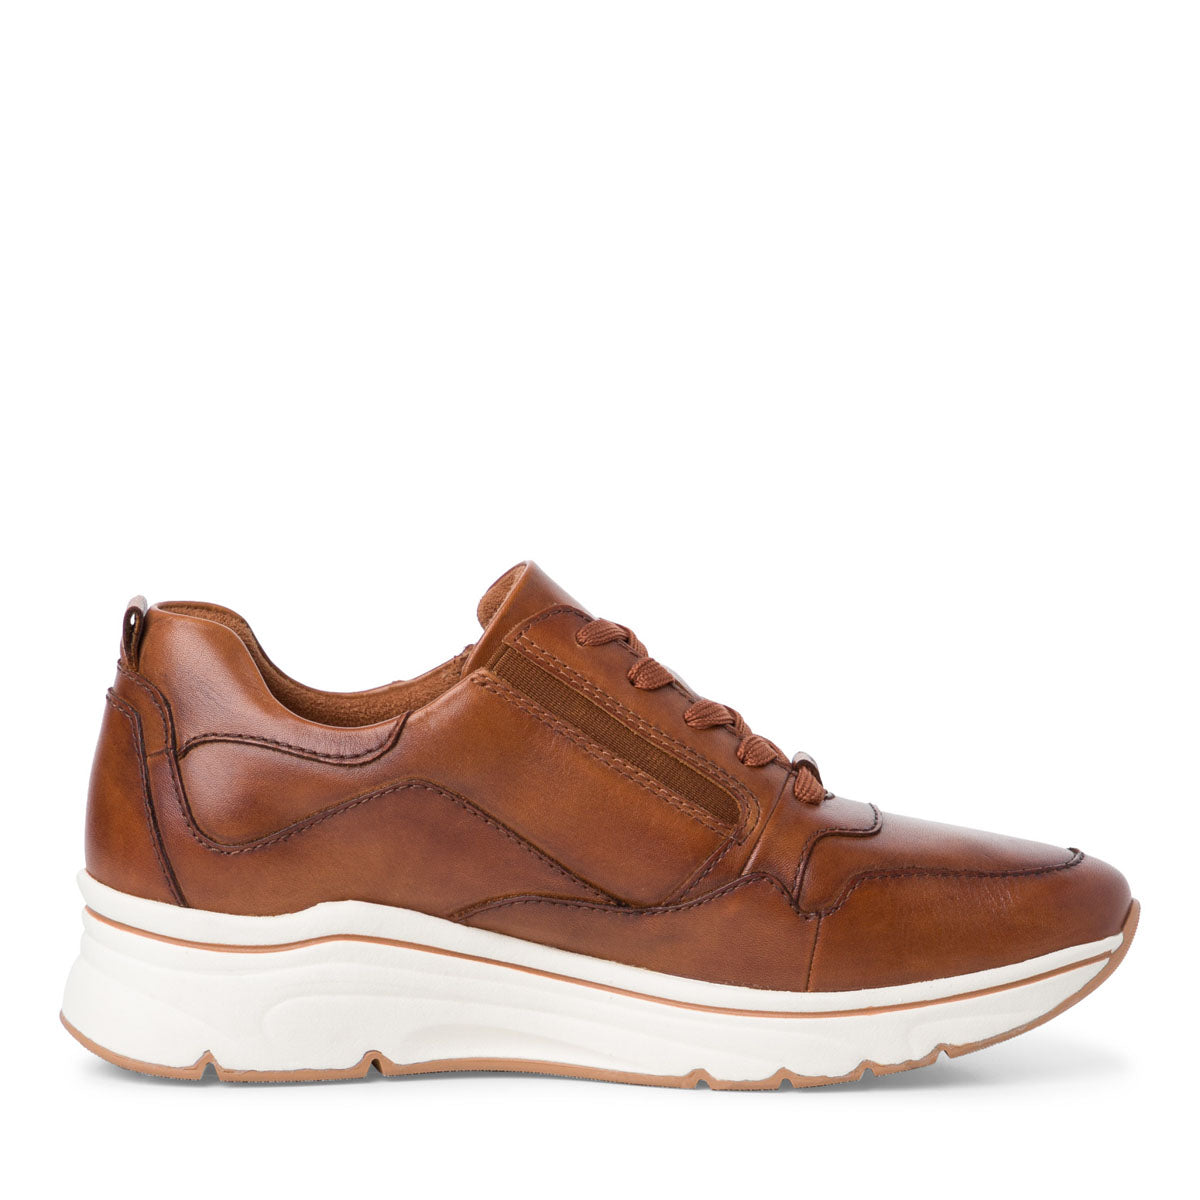 Runner High Lace-Up Shoes in Cognac